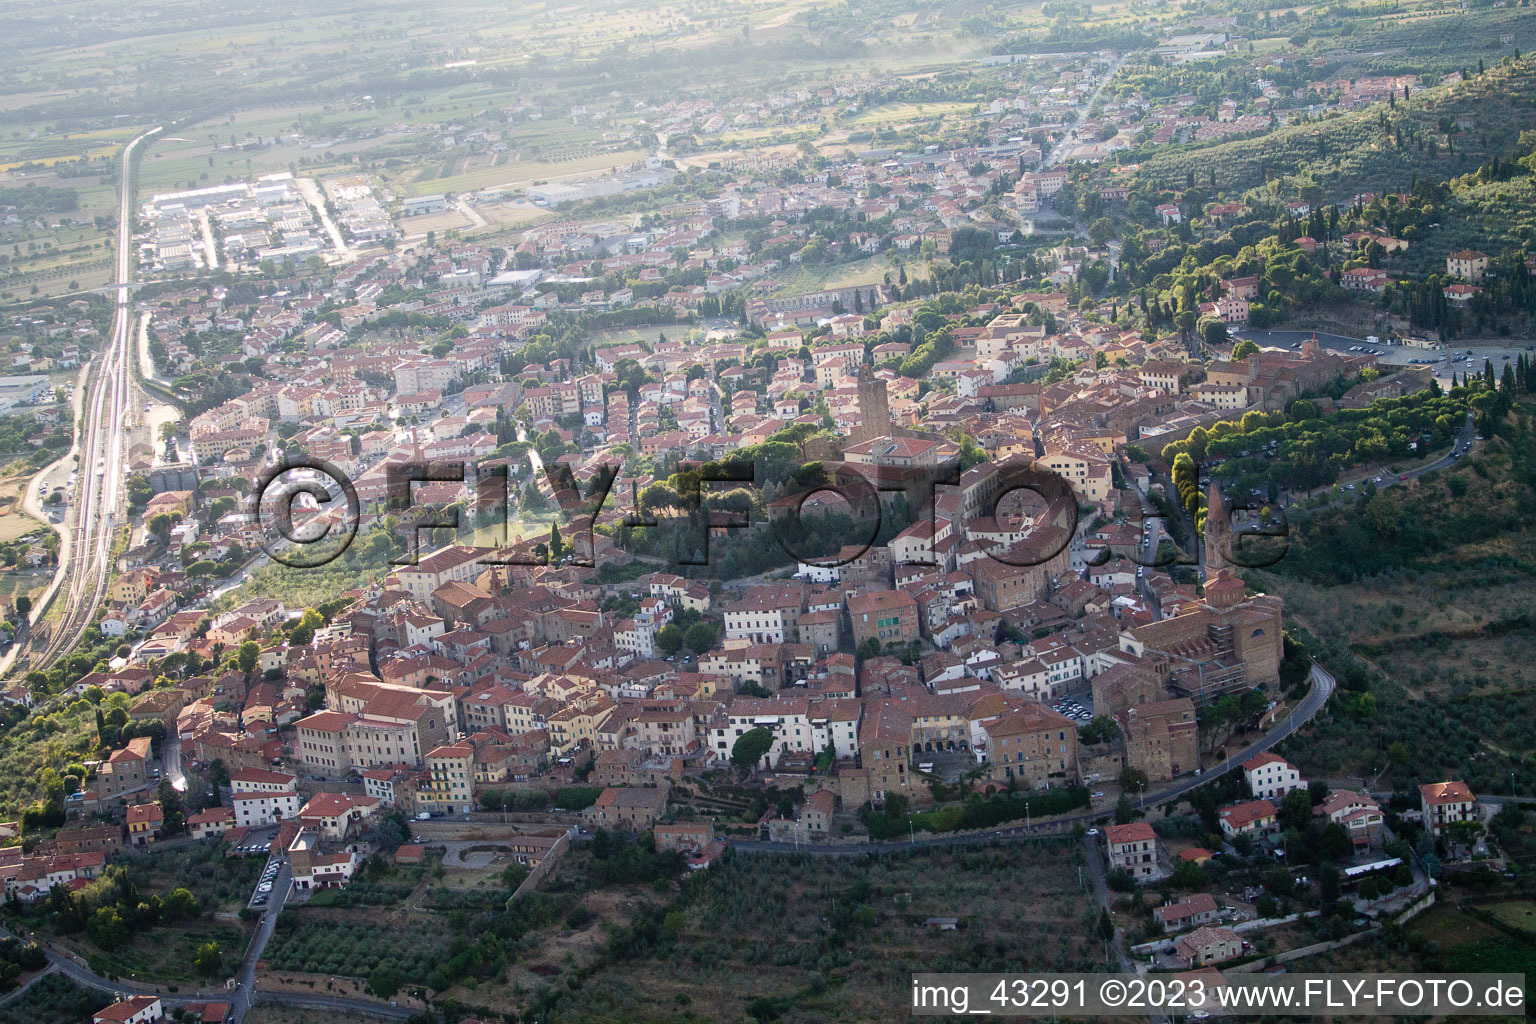 Poggiolo in the state Tuscany, Italy seen from above